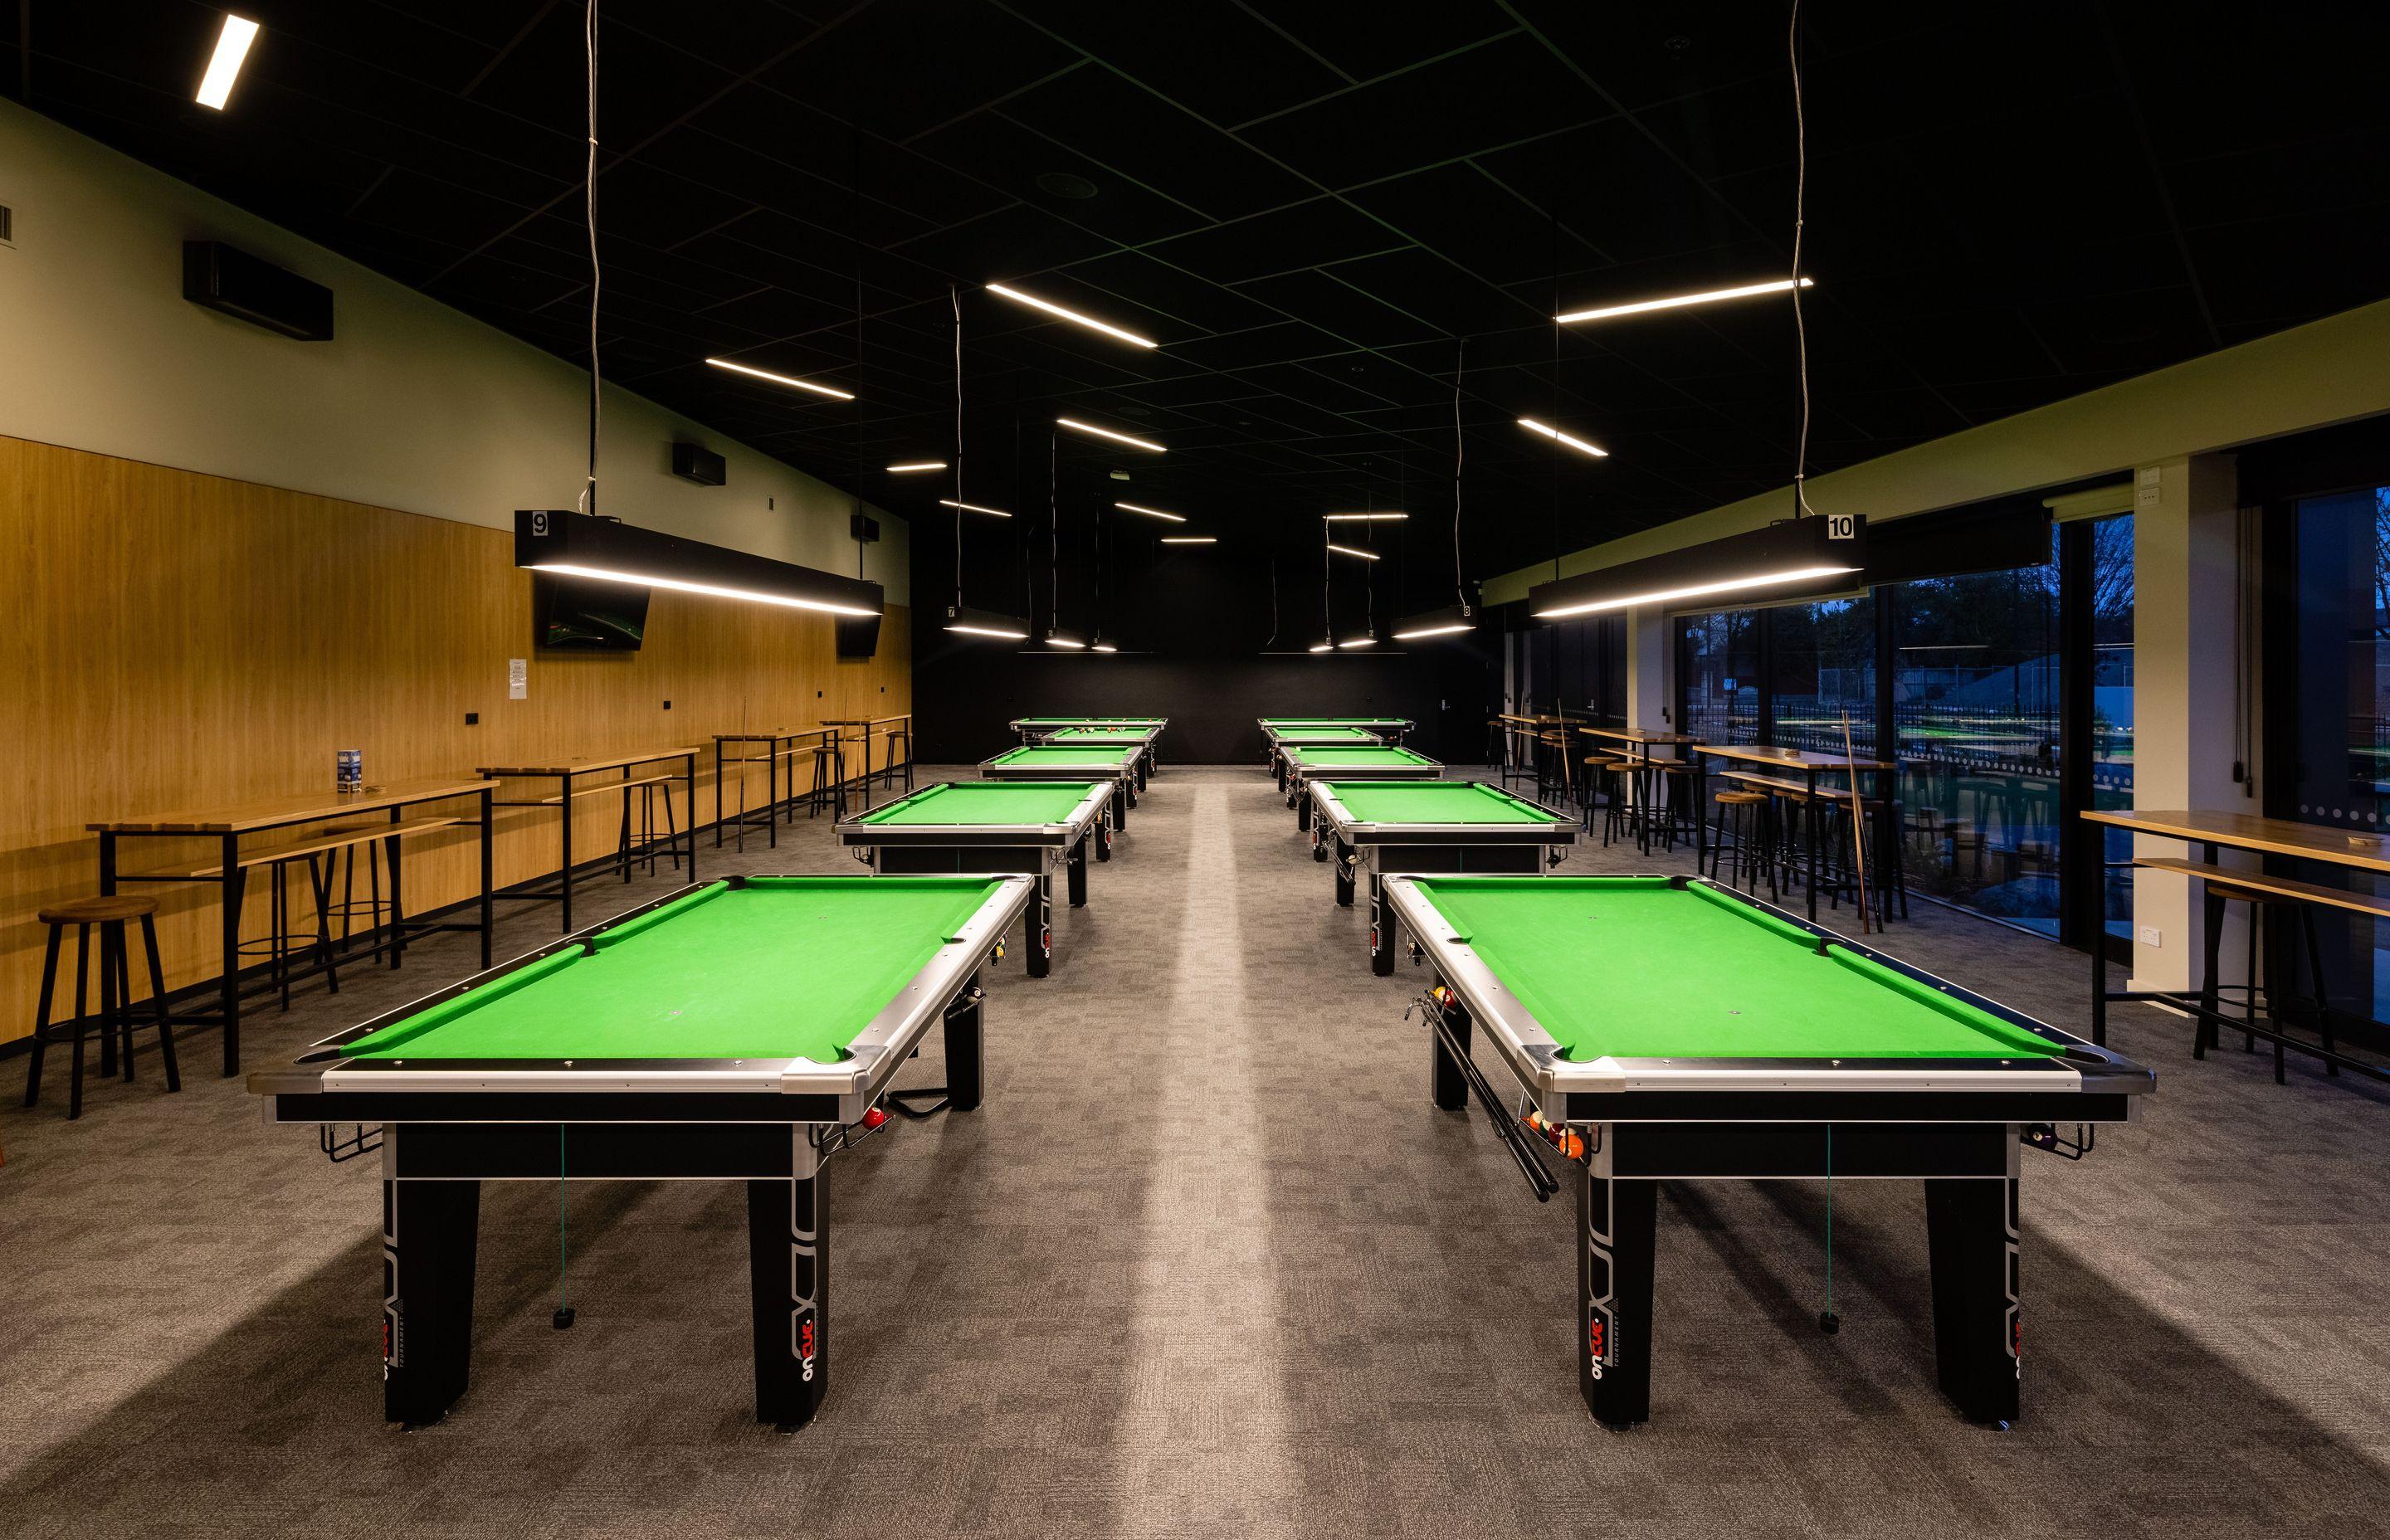 A billiards room is just one of the members' areas within the club. Photography by Clinton Lloyd.